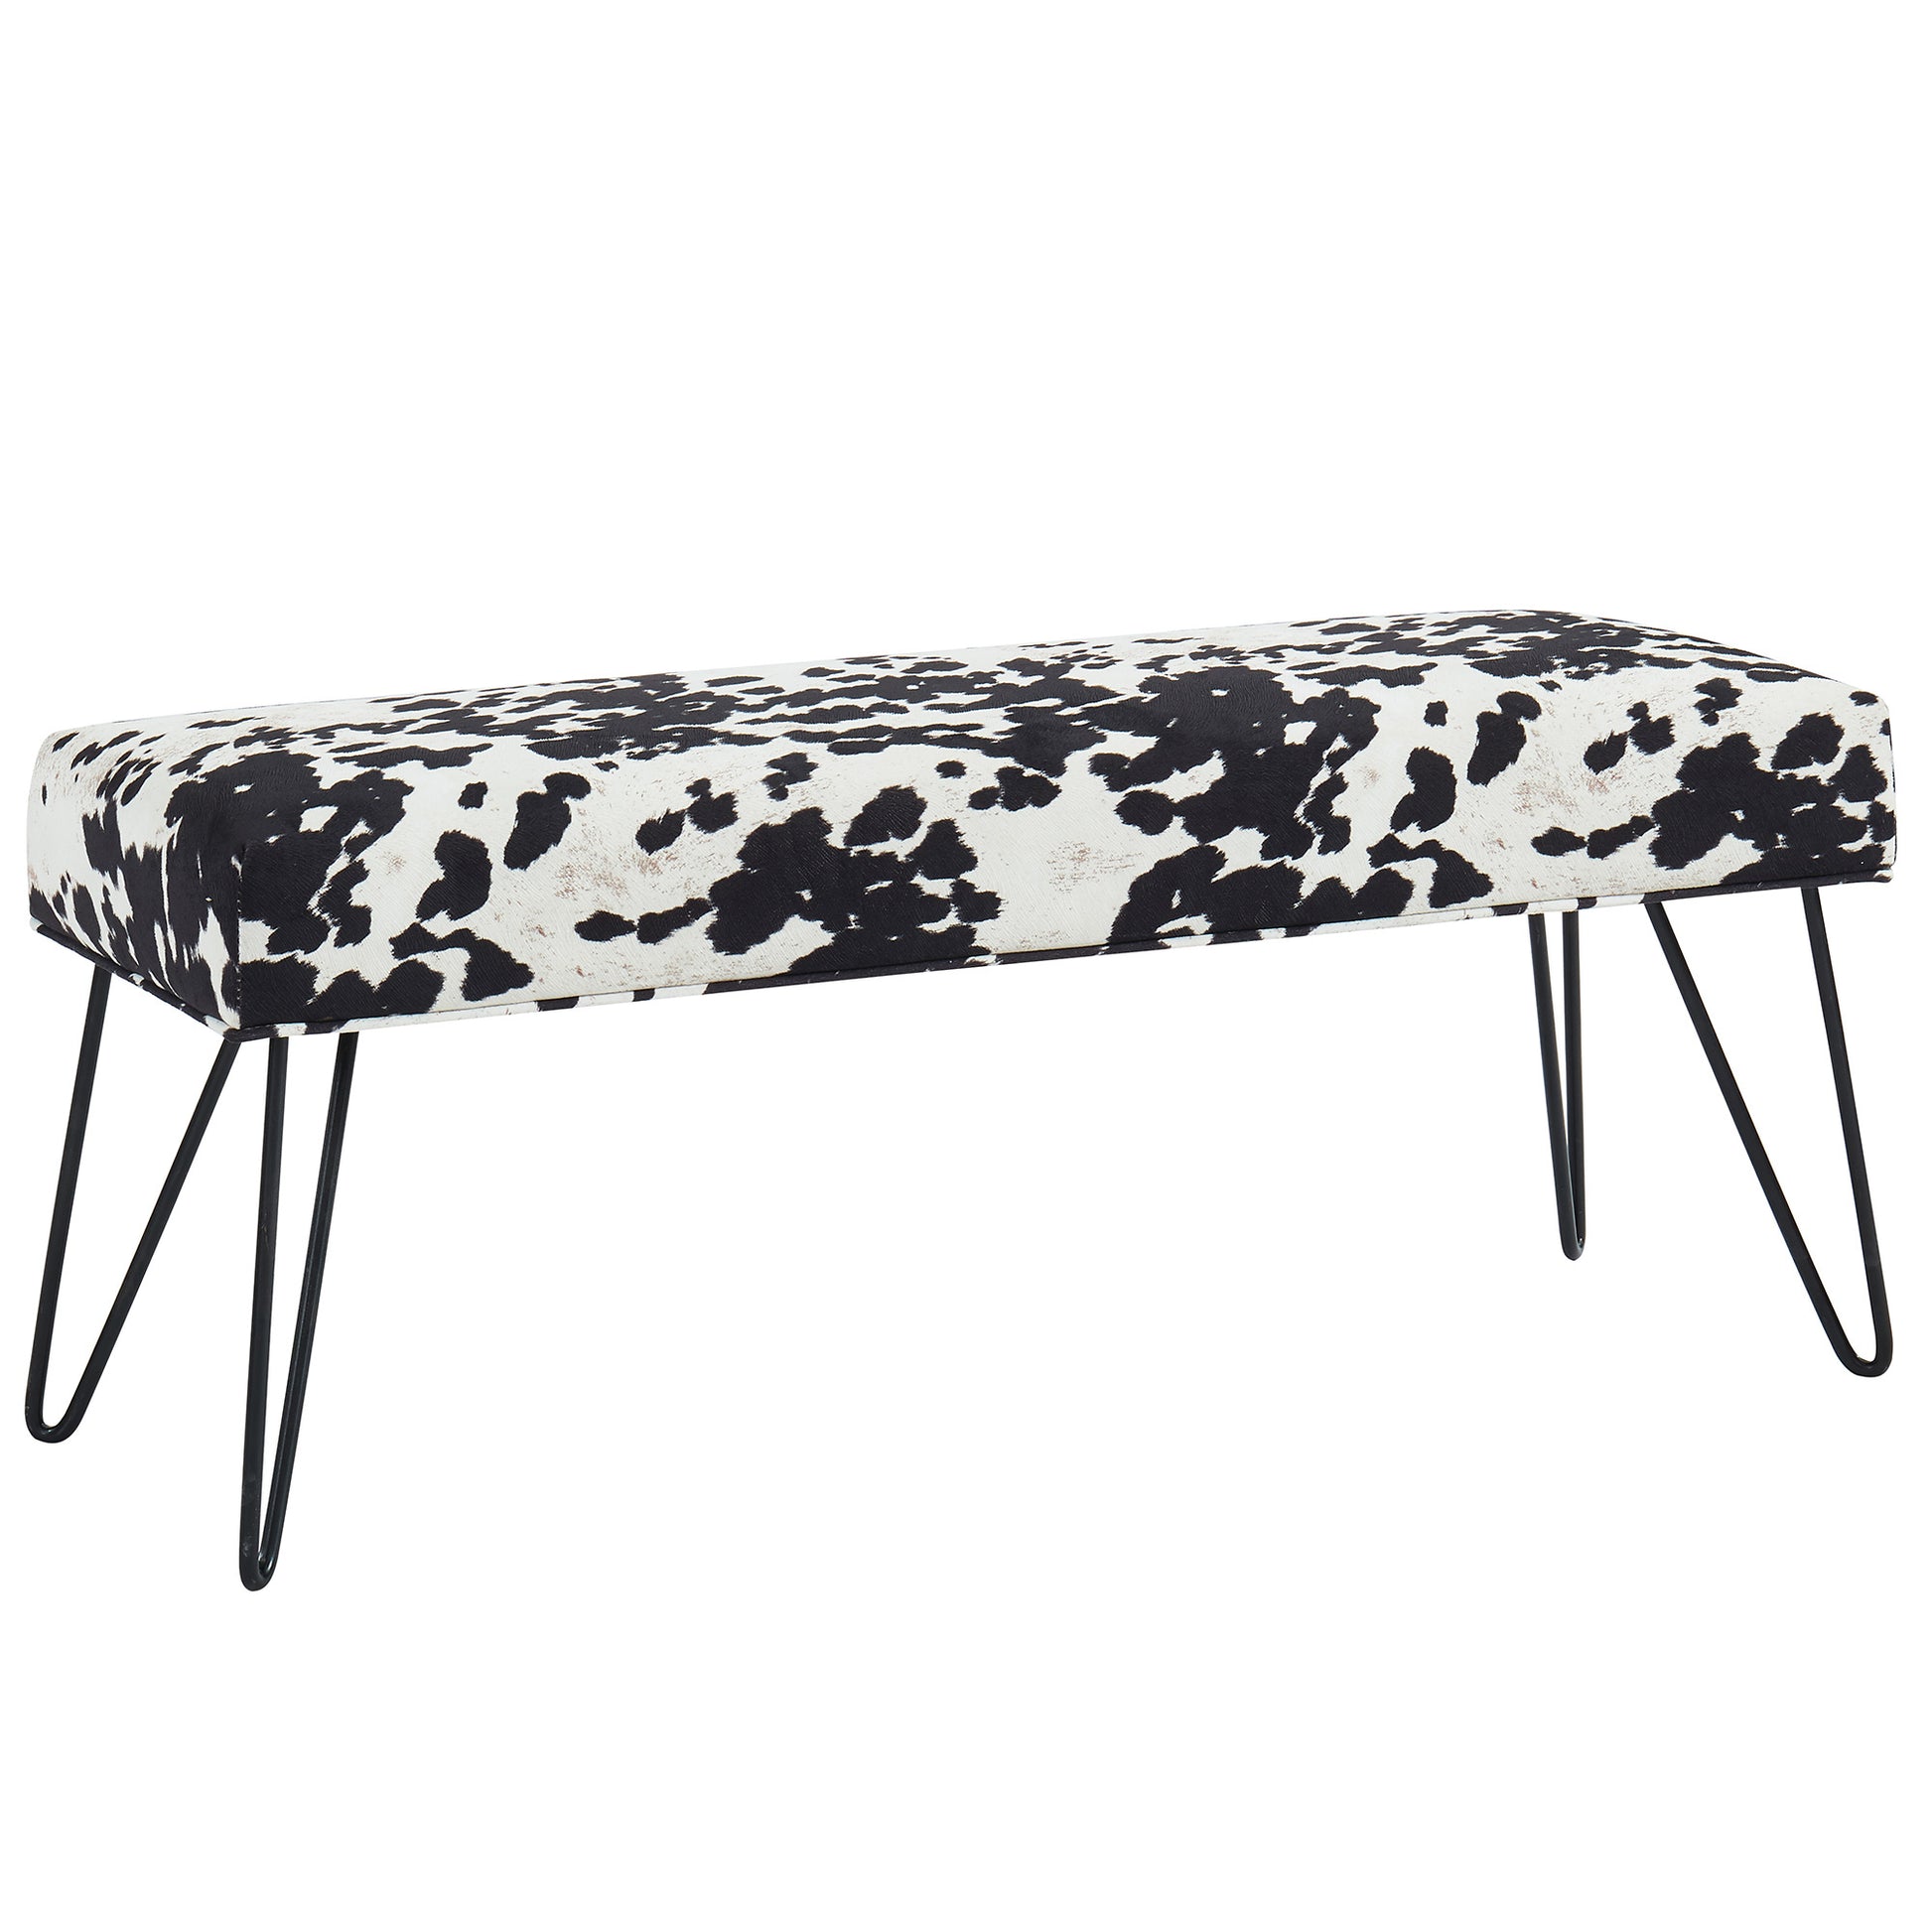 Angus Bench in Black - Dreamart Gallery